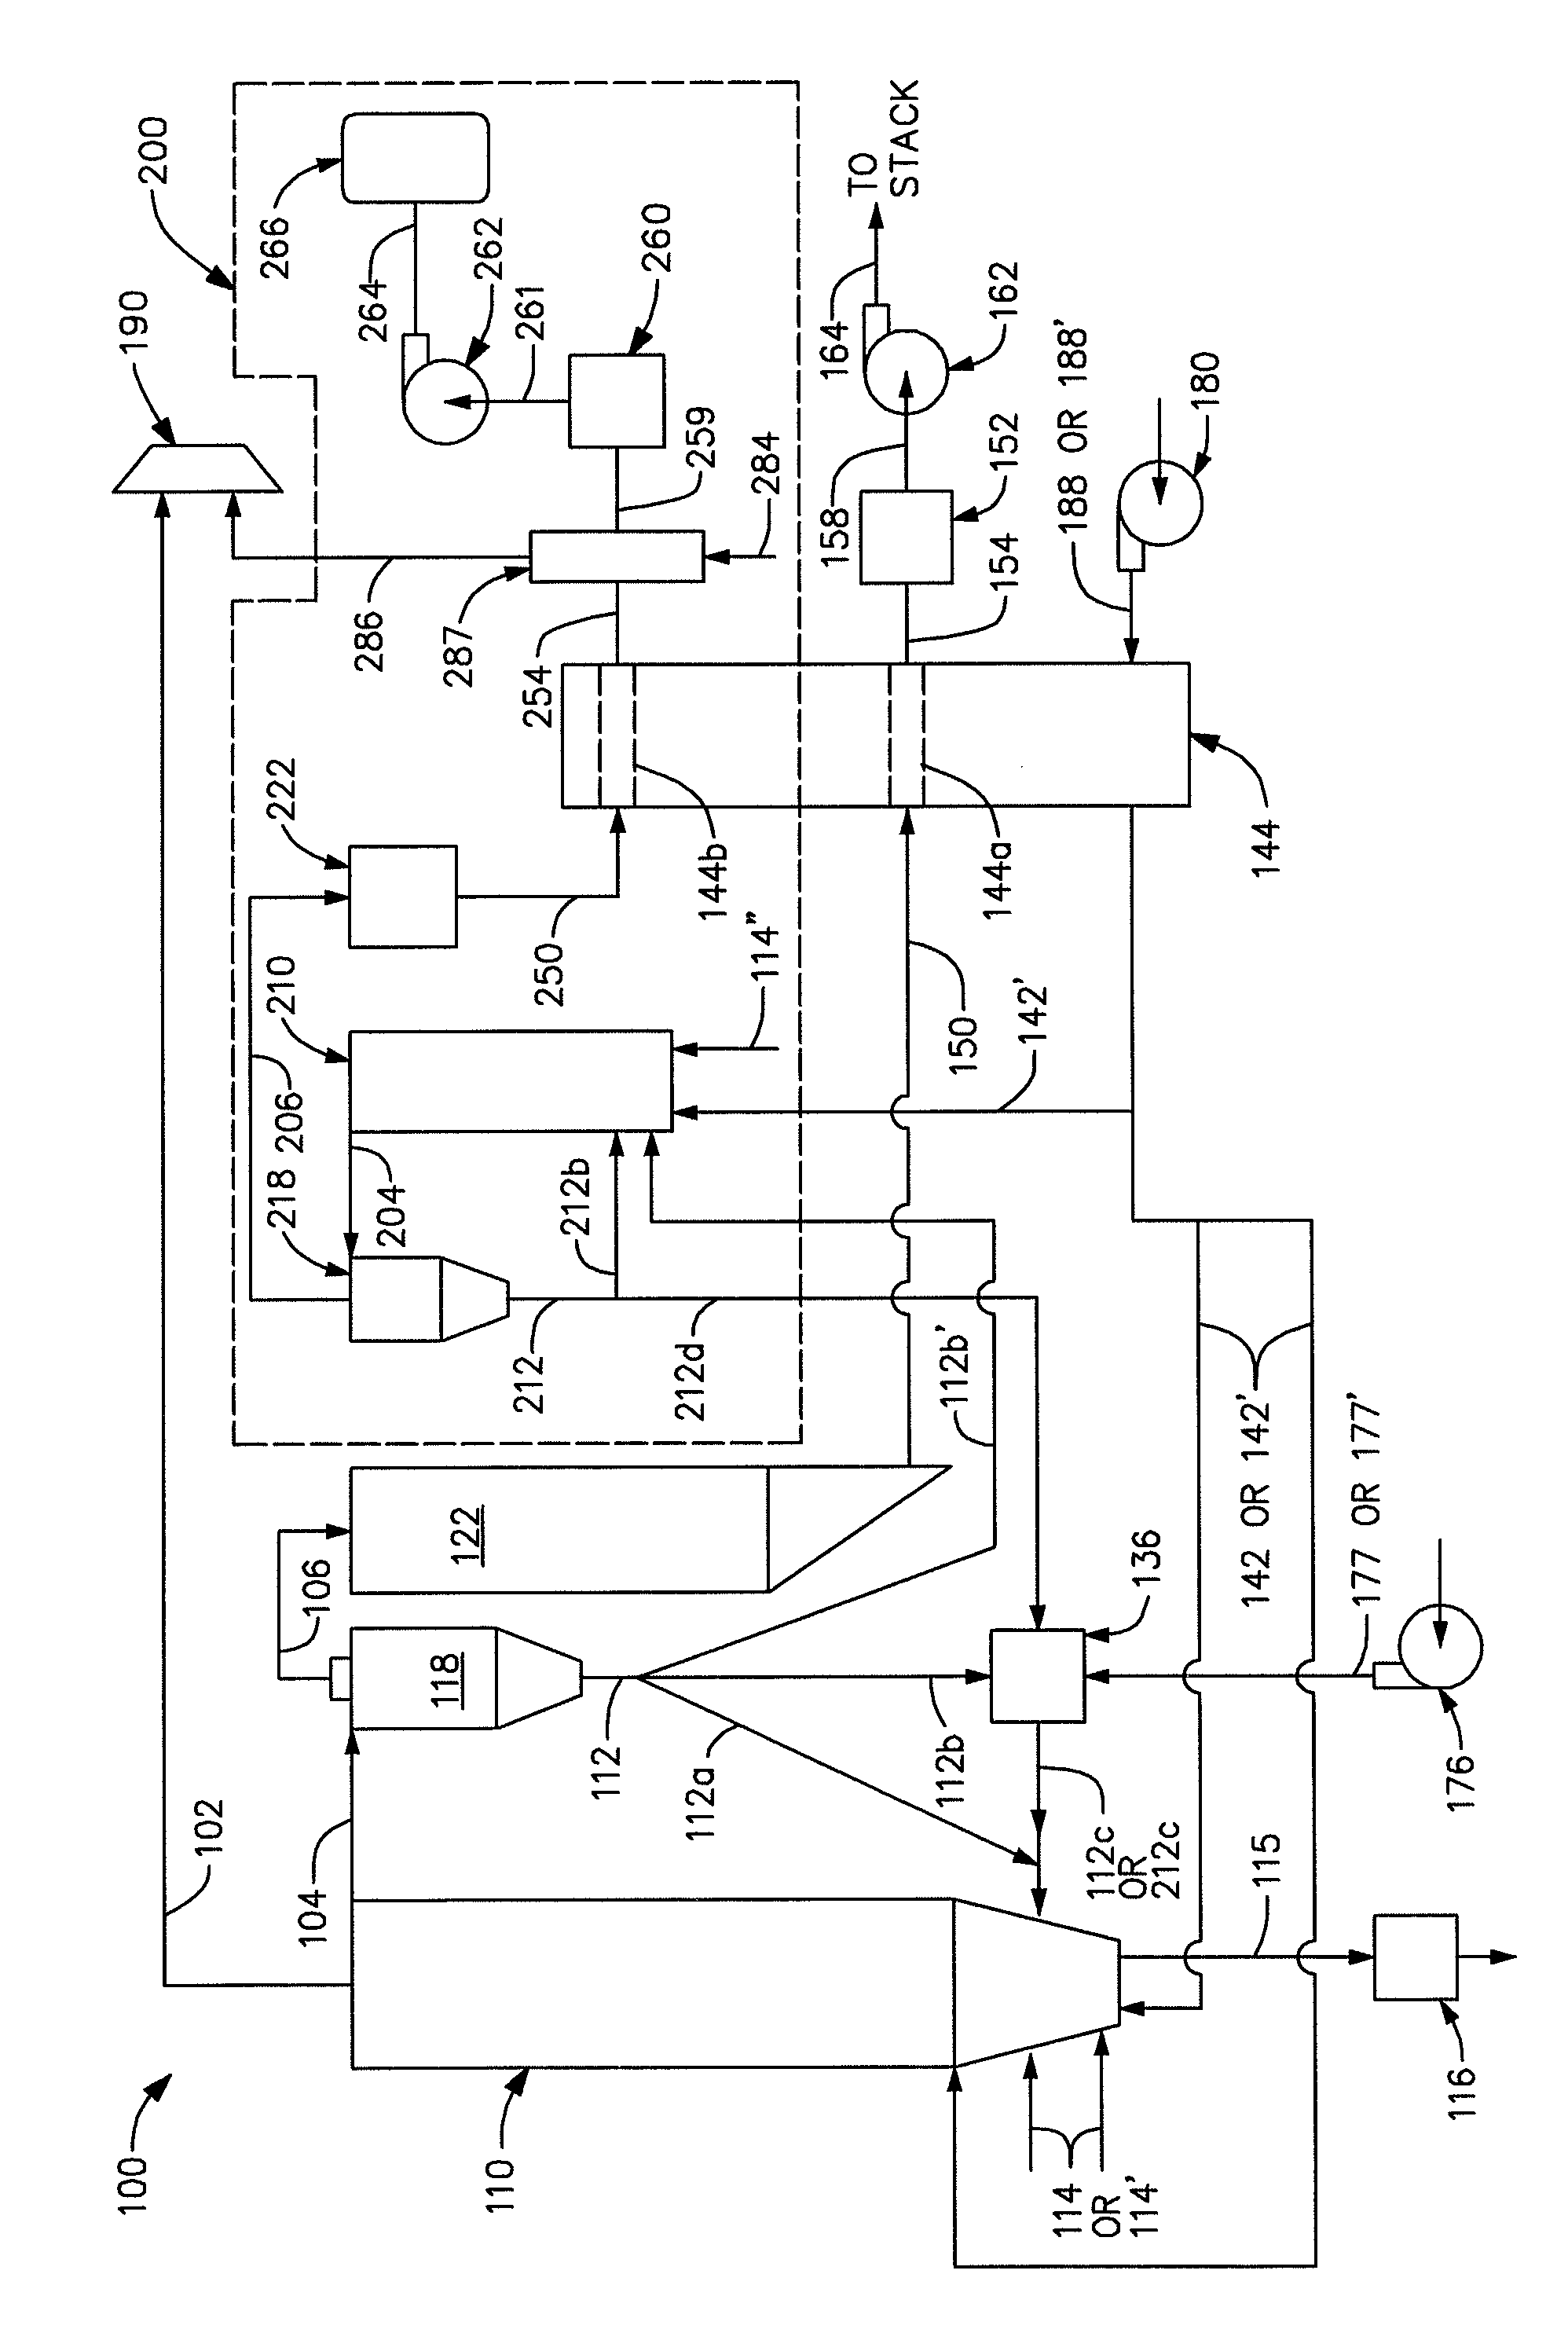 Air-fired CO2 capture ready circulating fluidized bed heat generation with a reactor subsystem